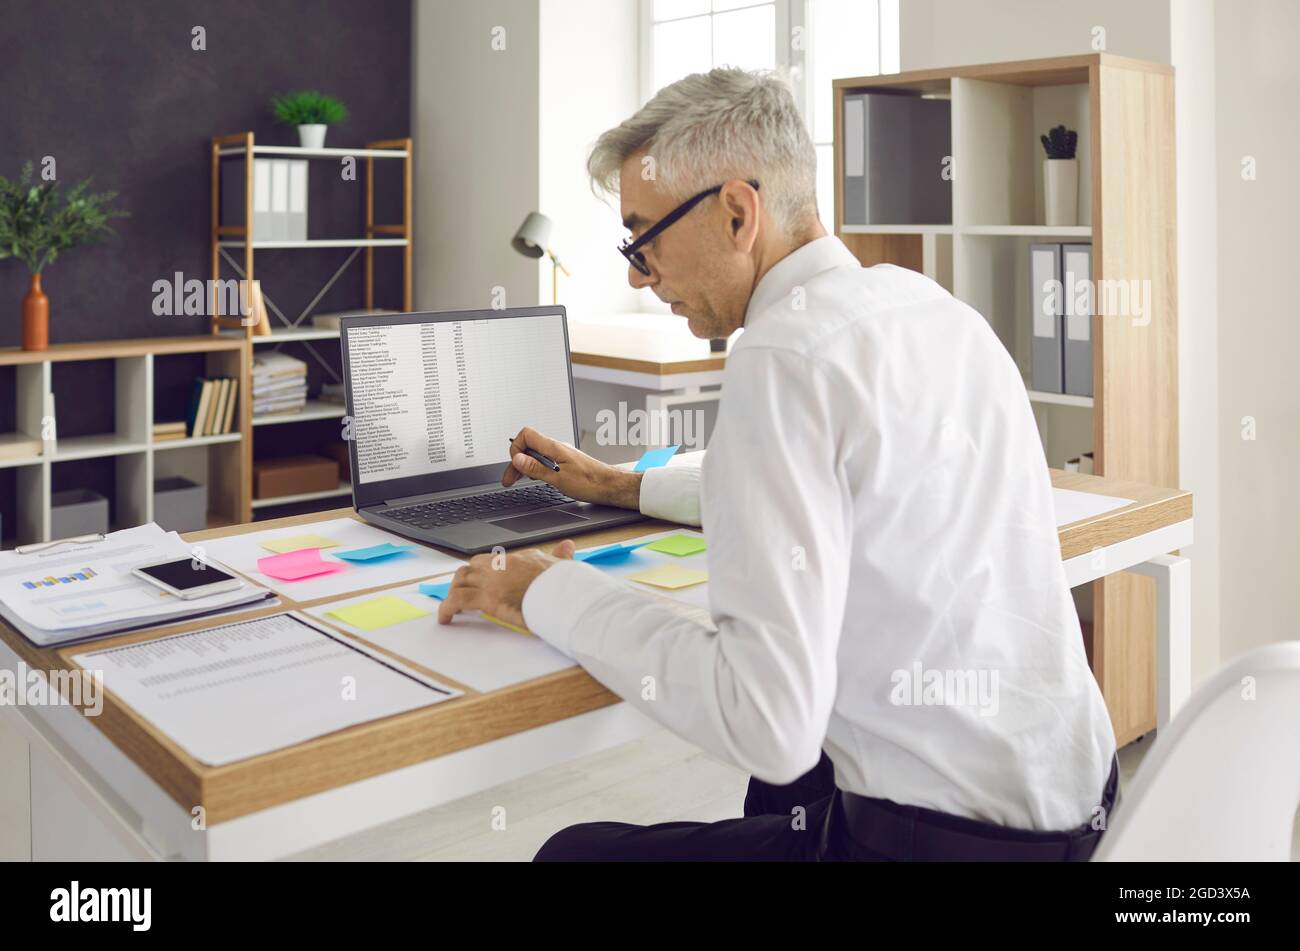 Senior man working at office desk with papers, post-it notes and laptop computer Stock Photo